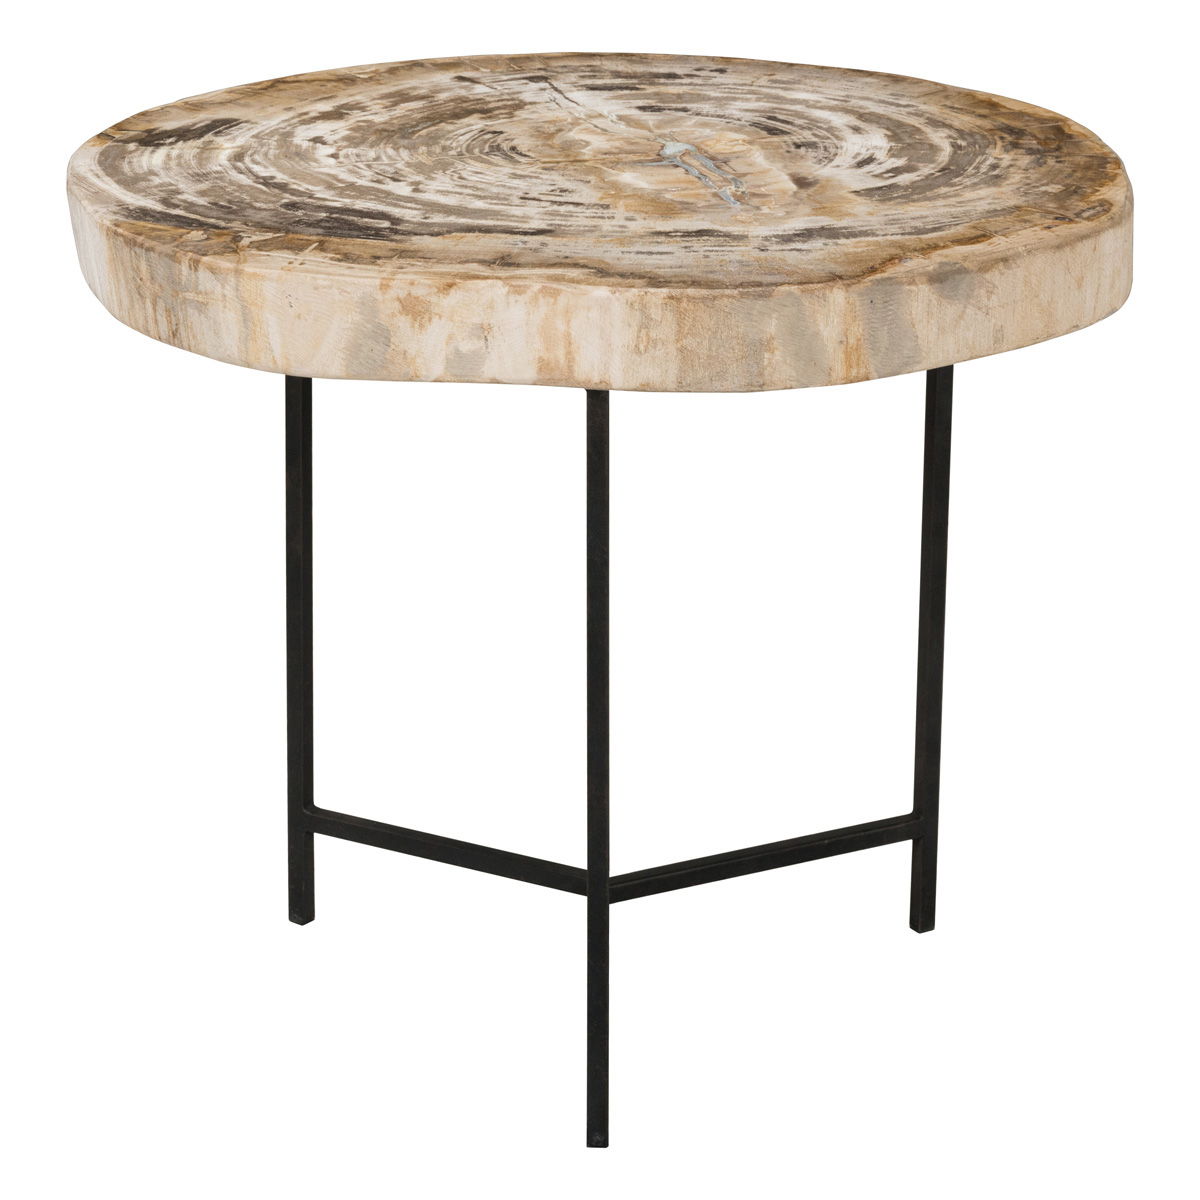 Riley - Petrified Wood Accent Table